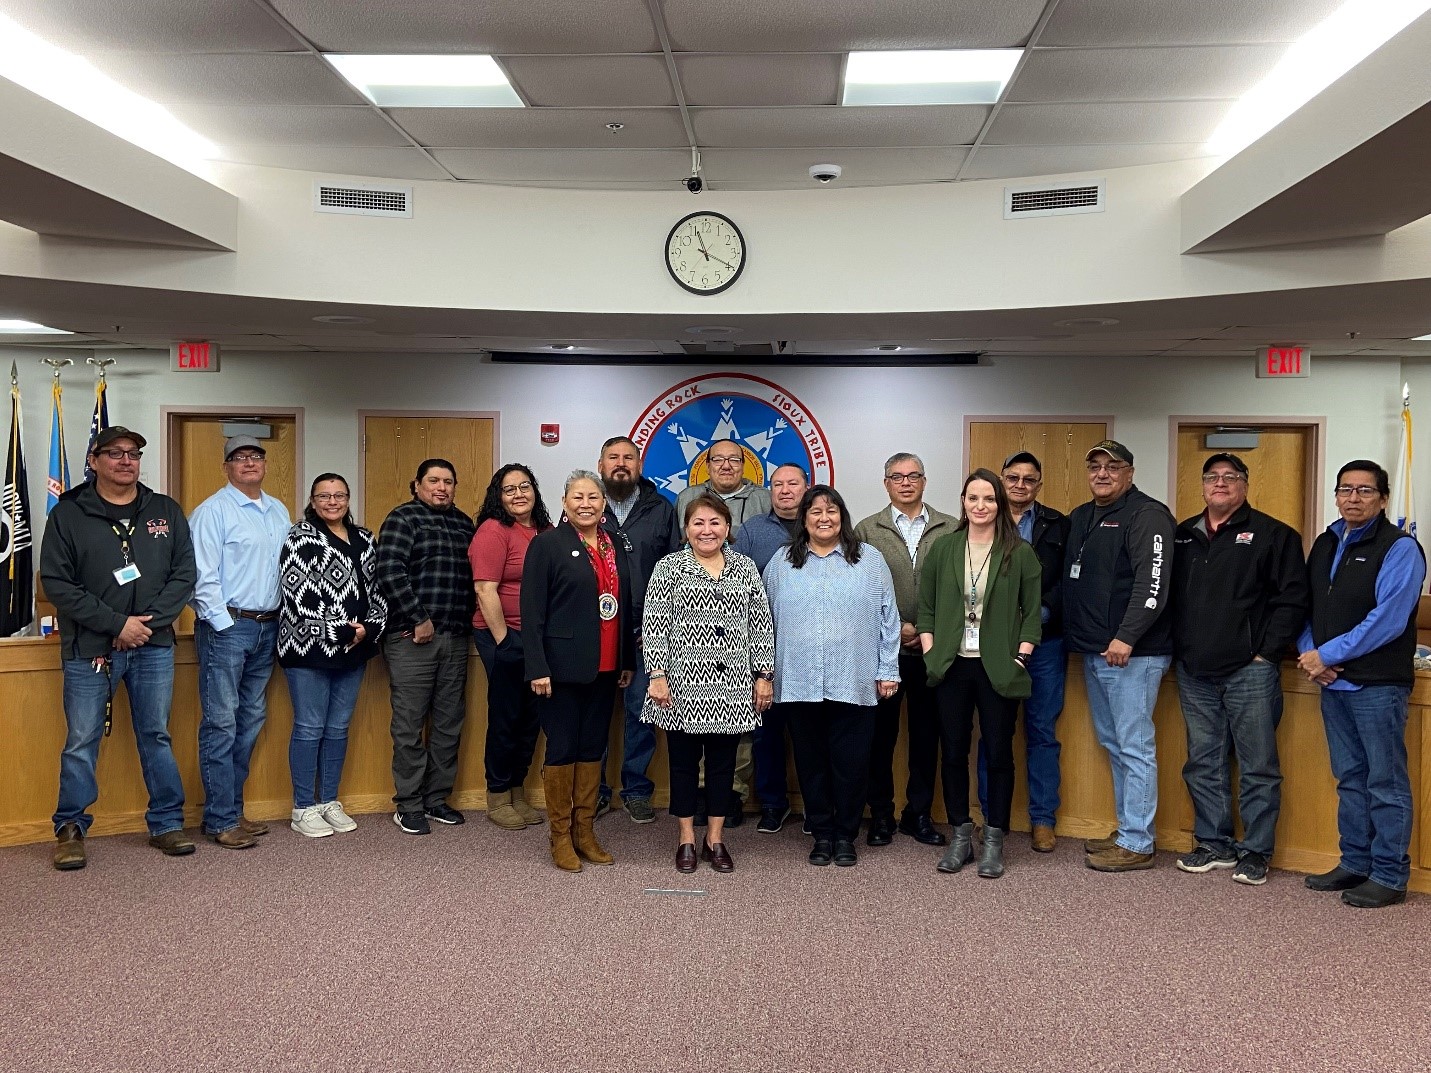 Visit with the Standing Rock Sioux Tribe in Fort Yates, ND, which was followed by a tour of the Standing Rock Service Unit Fort Yates Hospital